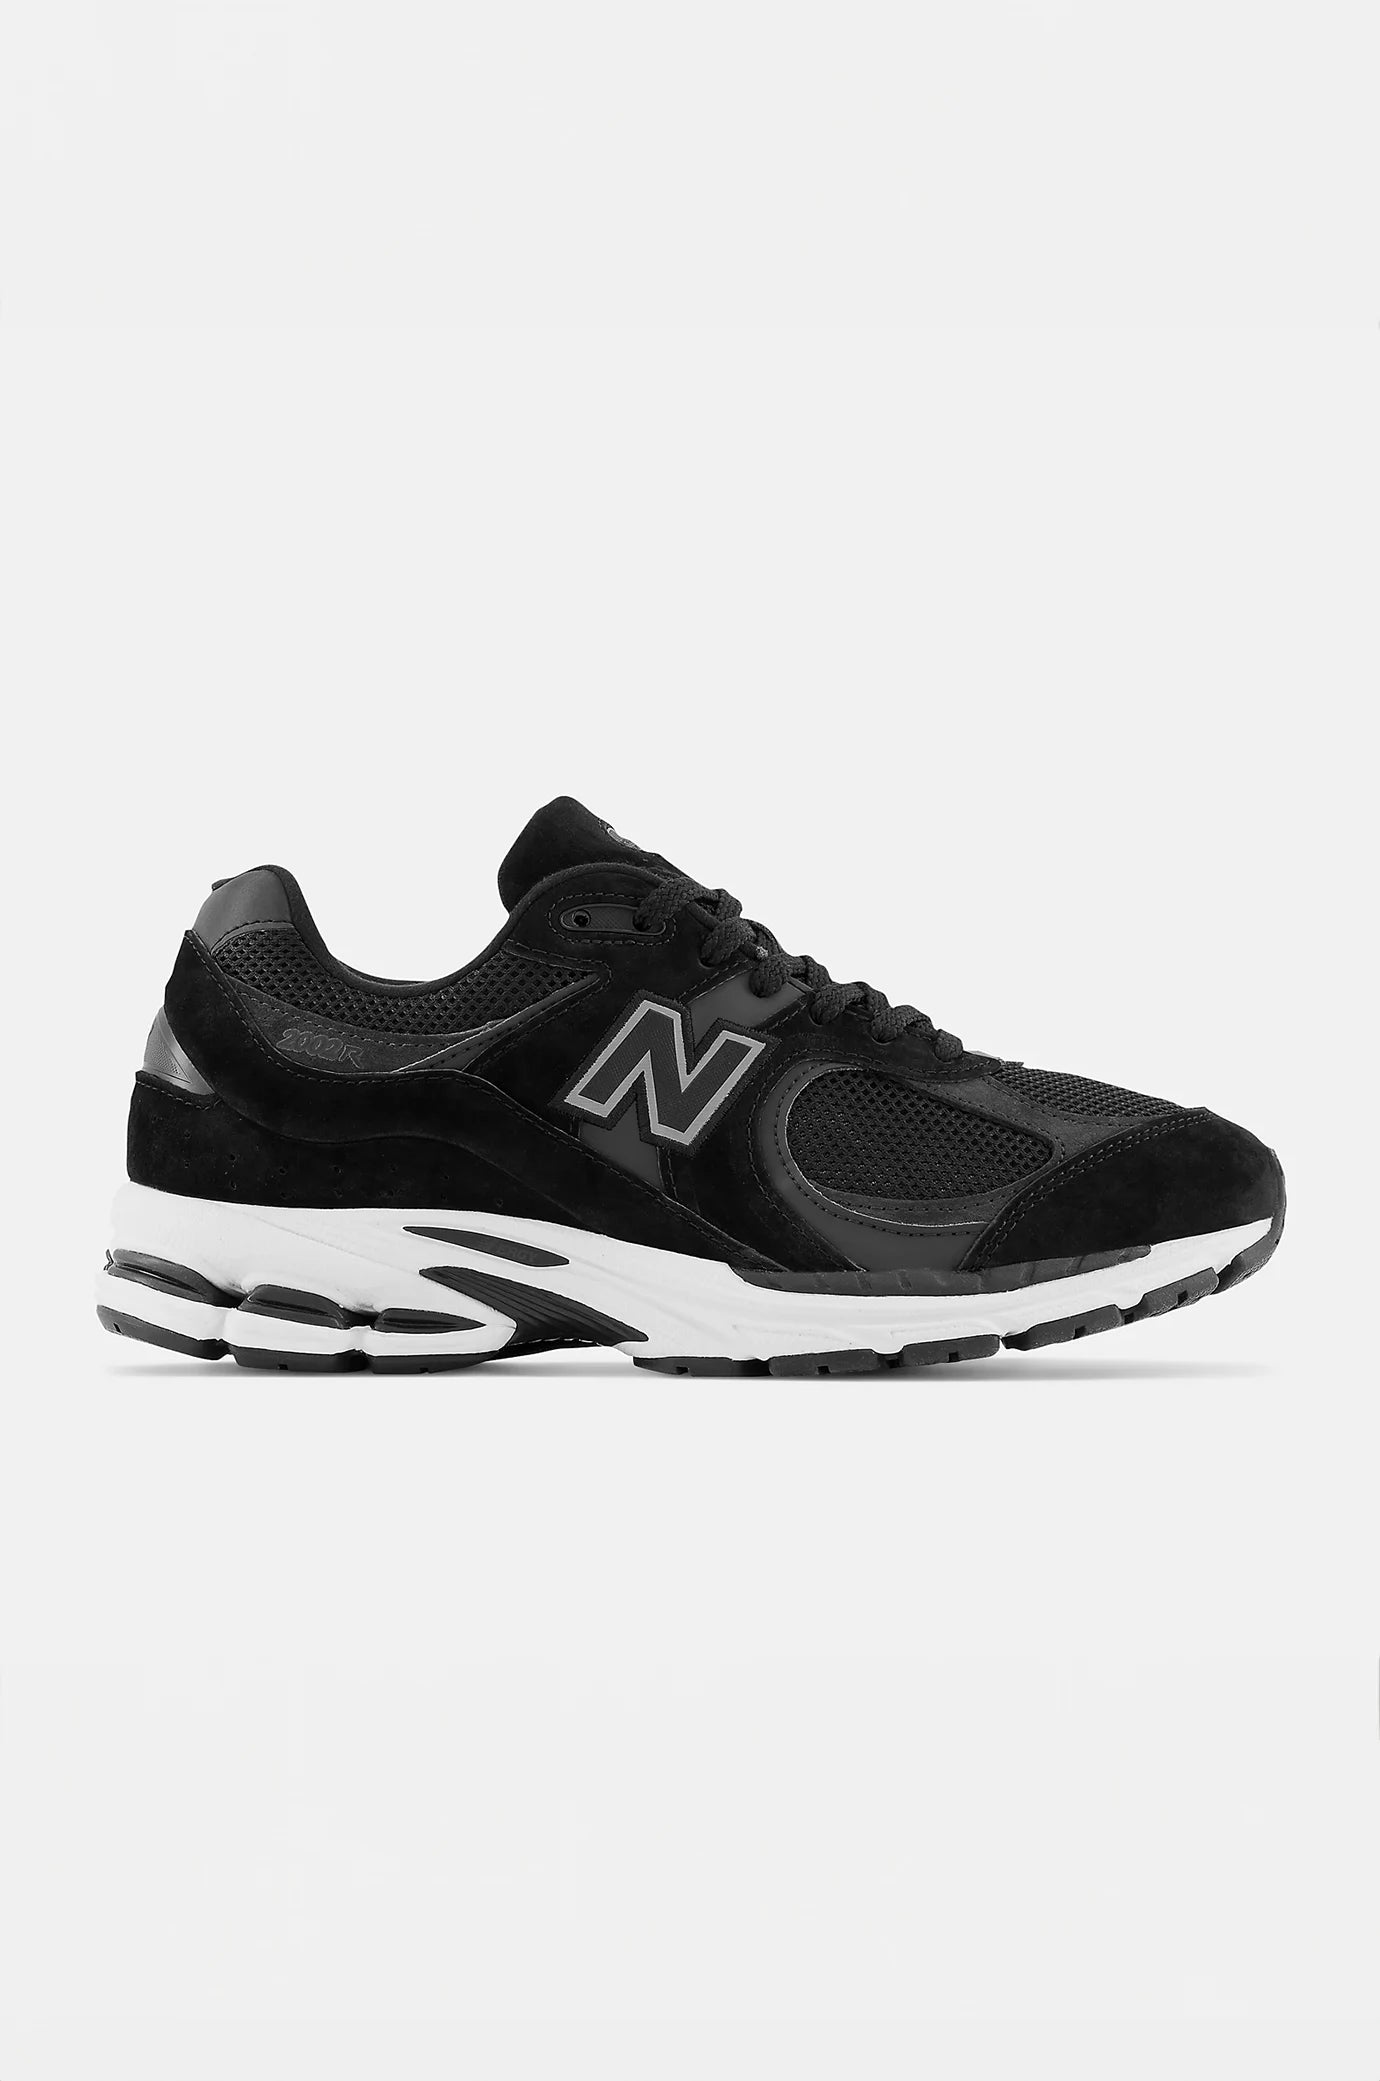 2002R Sneakers New Balance   